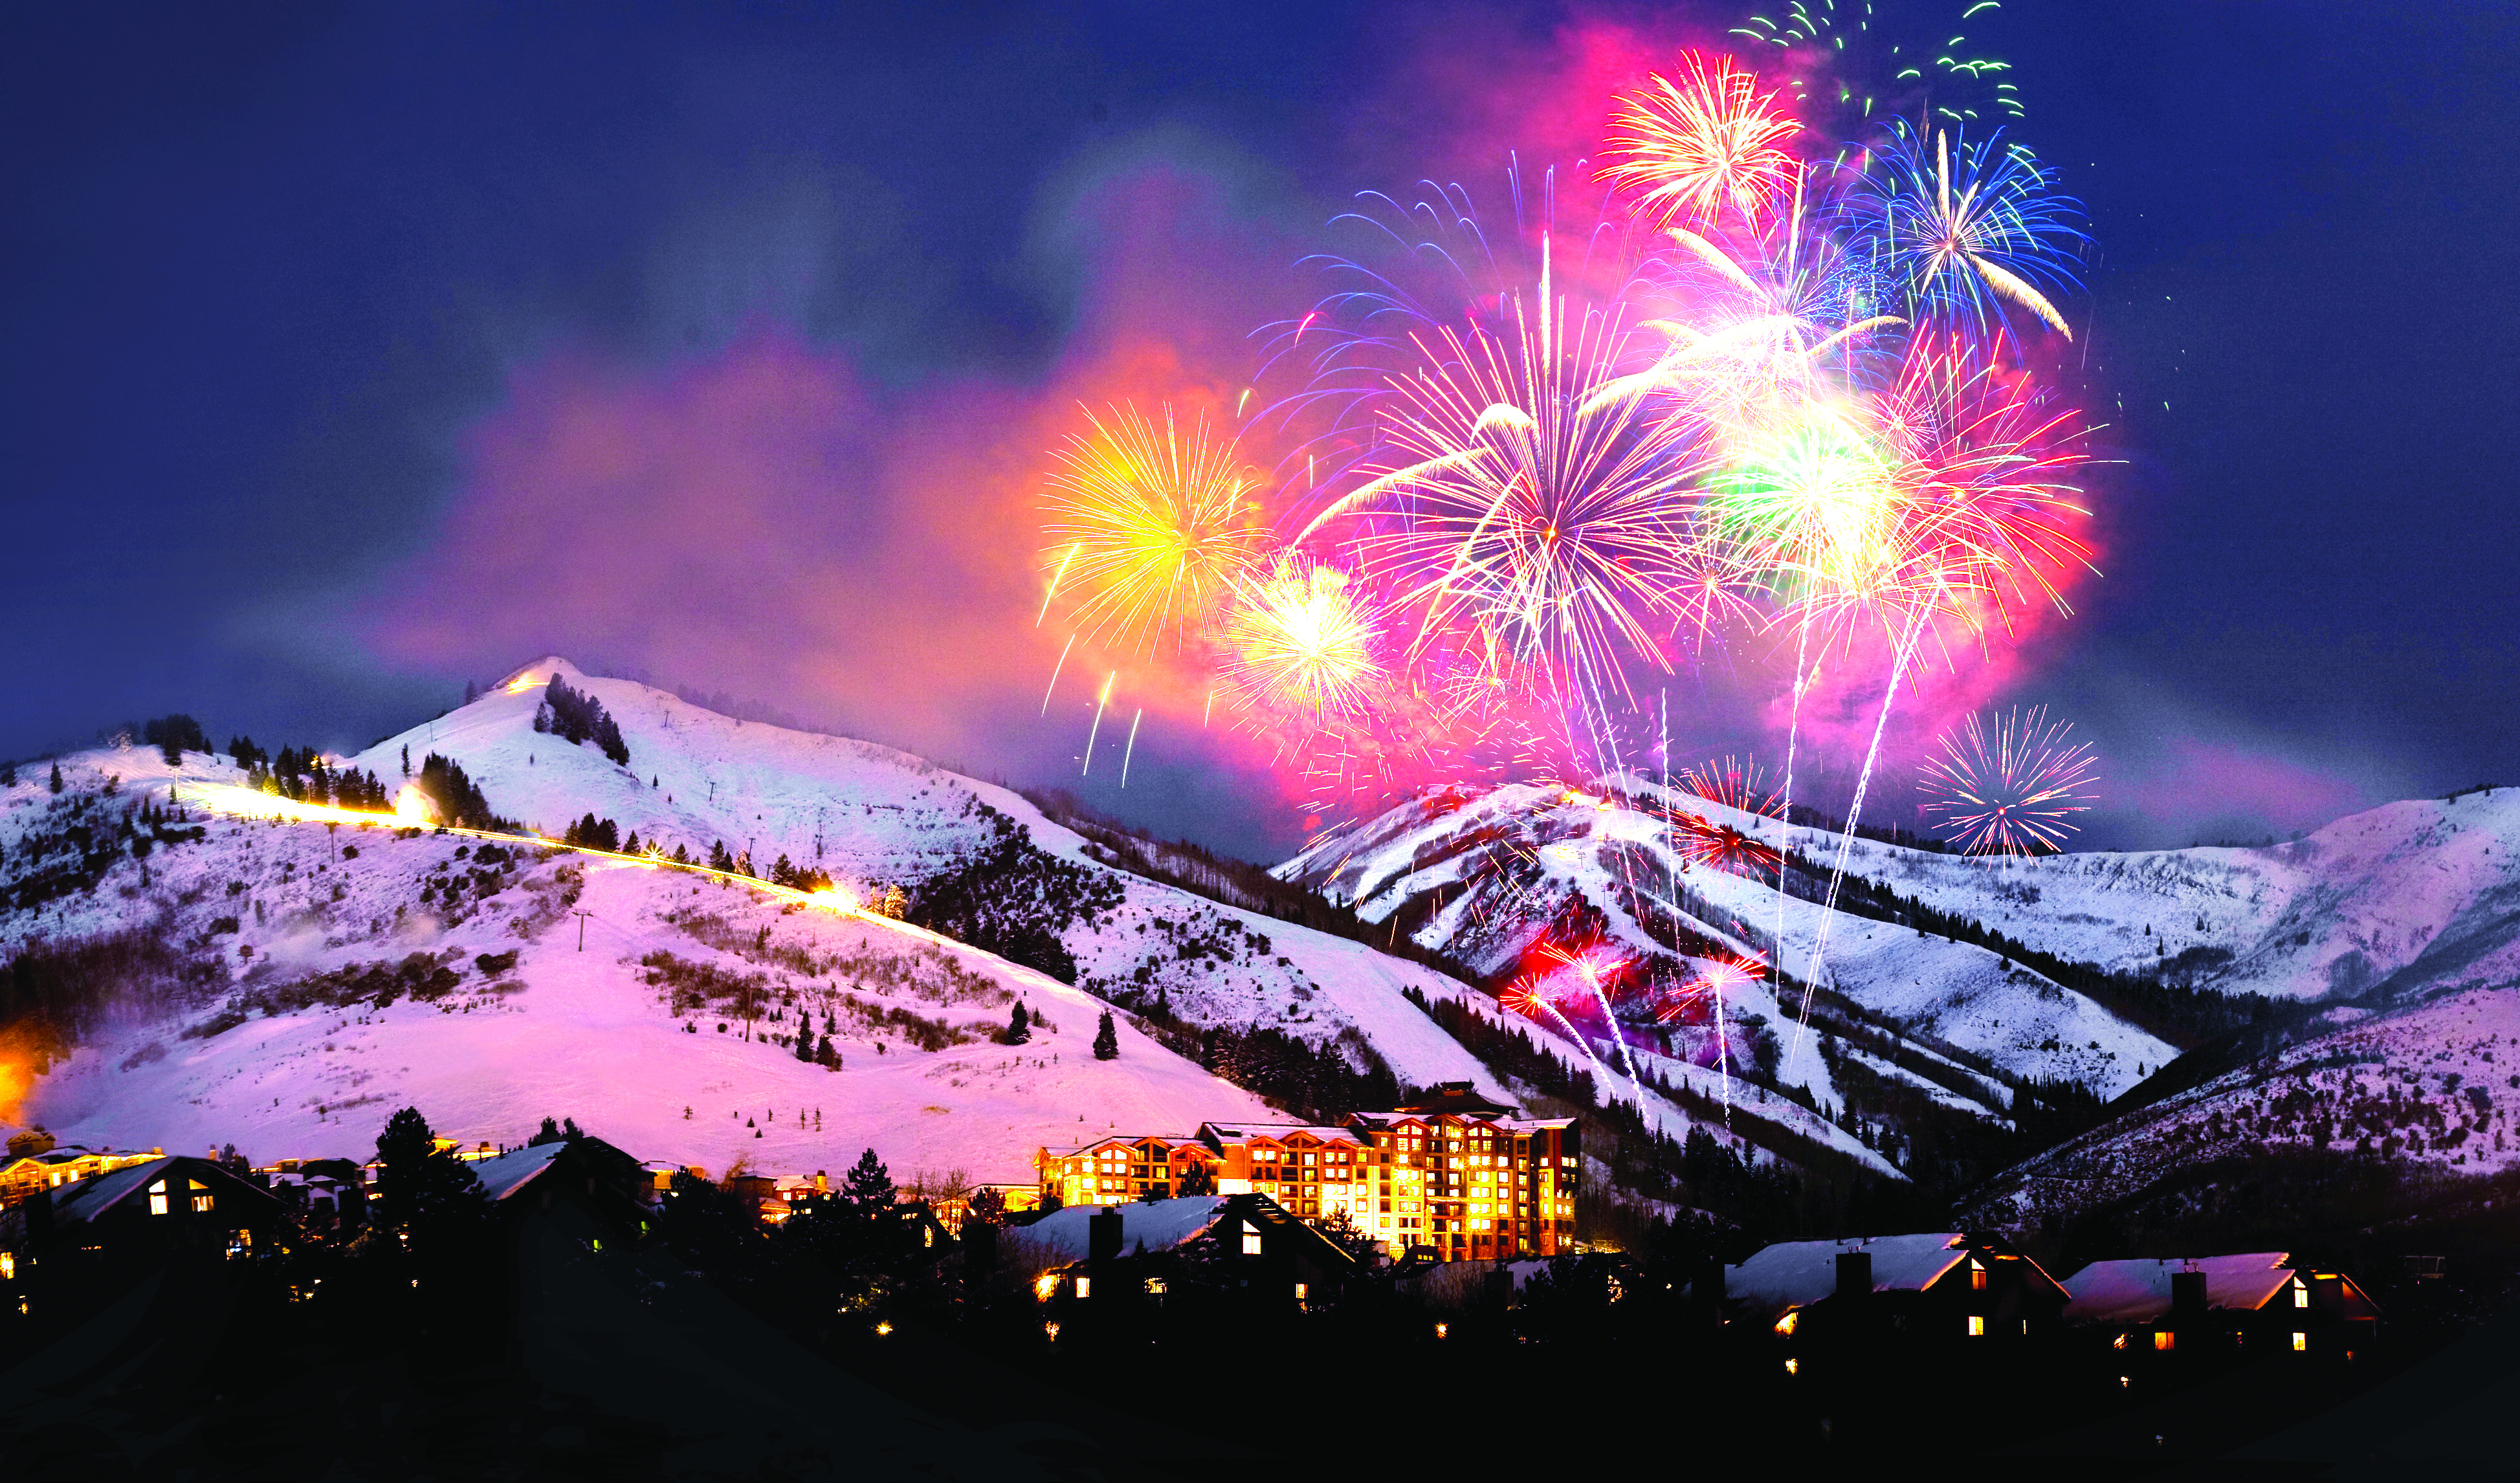 fireworks over town in mountains